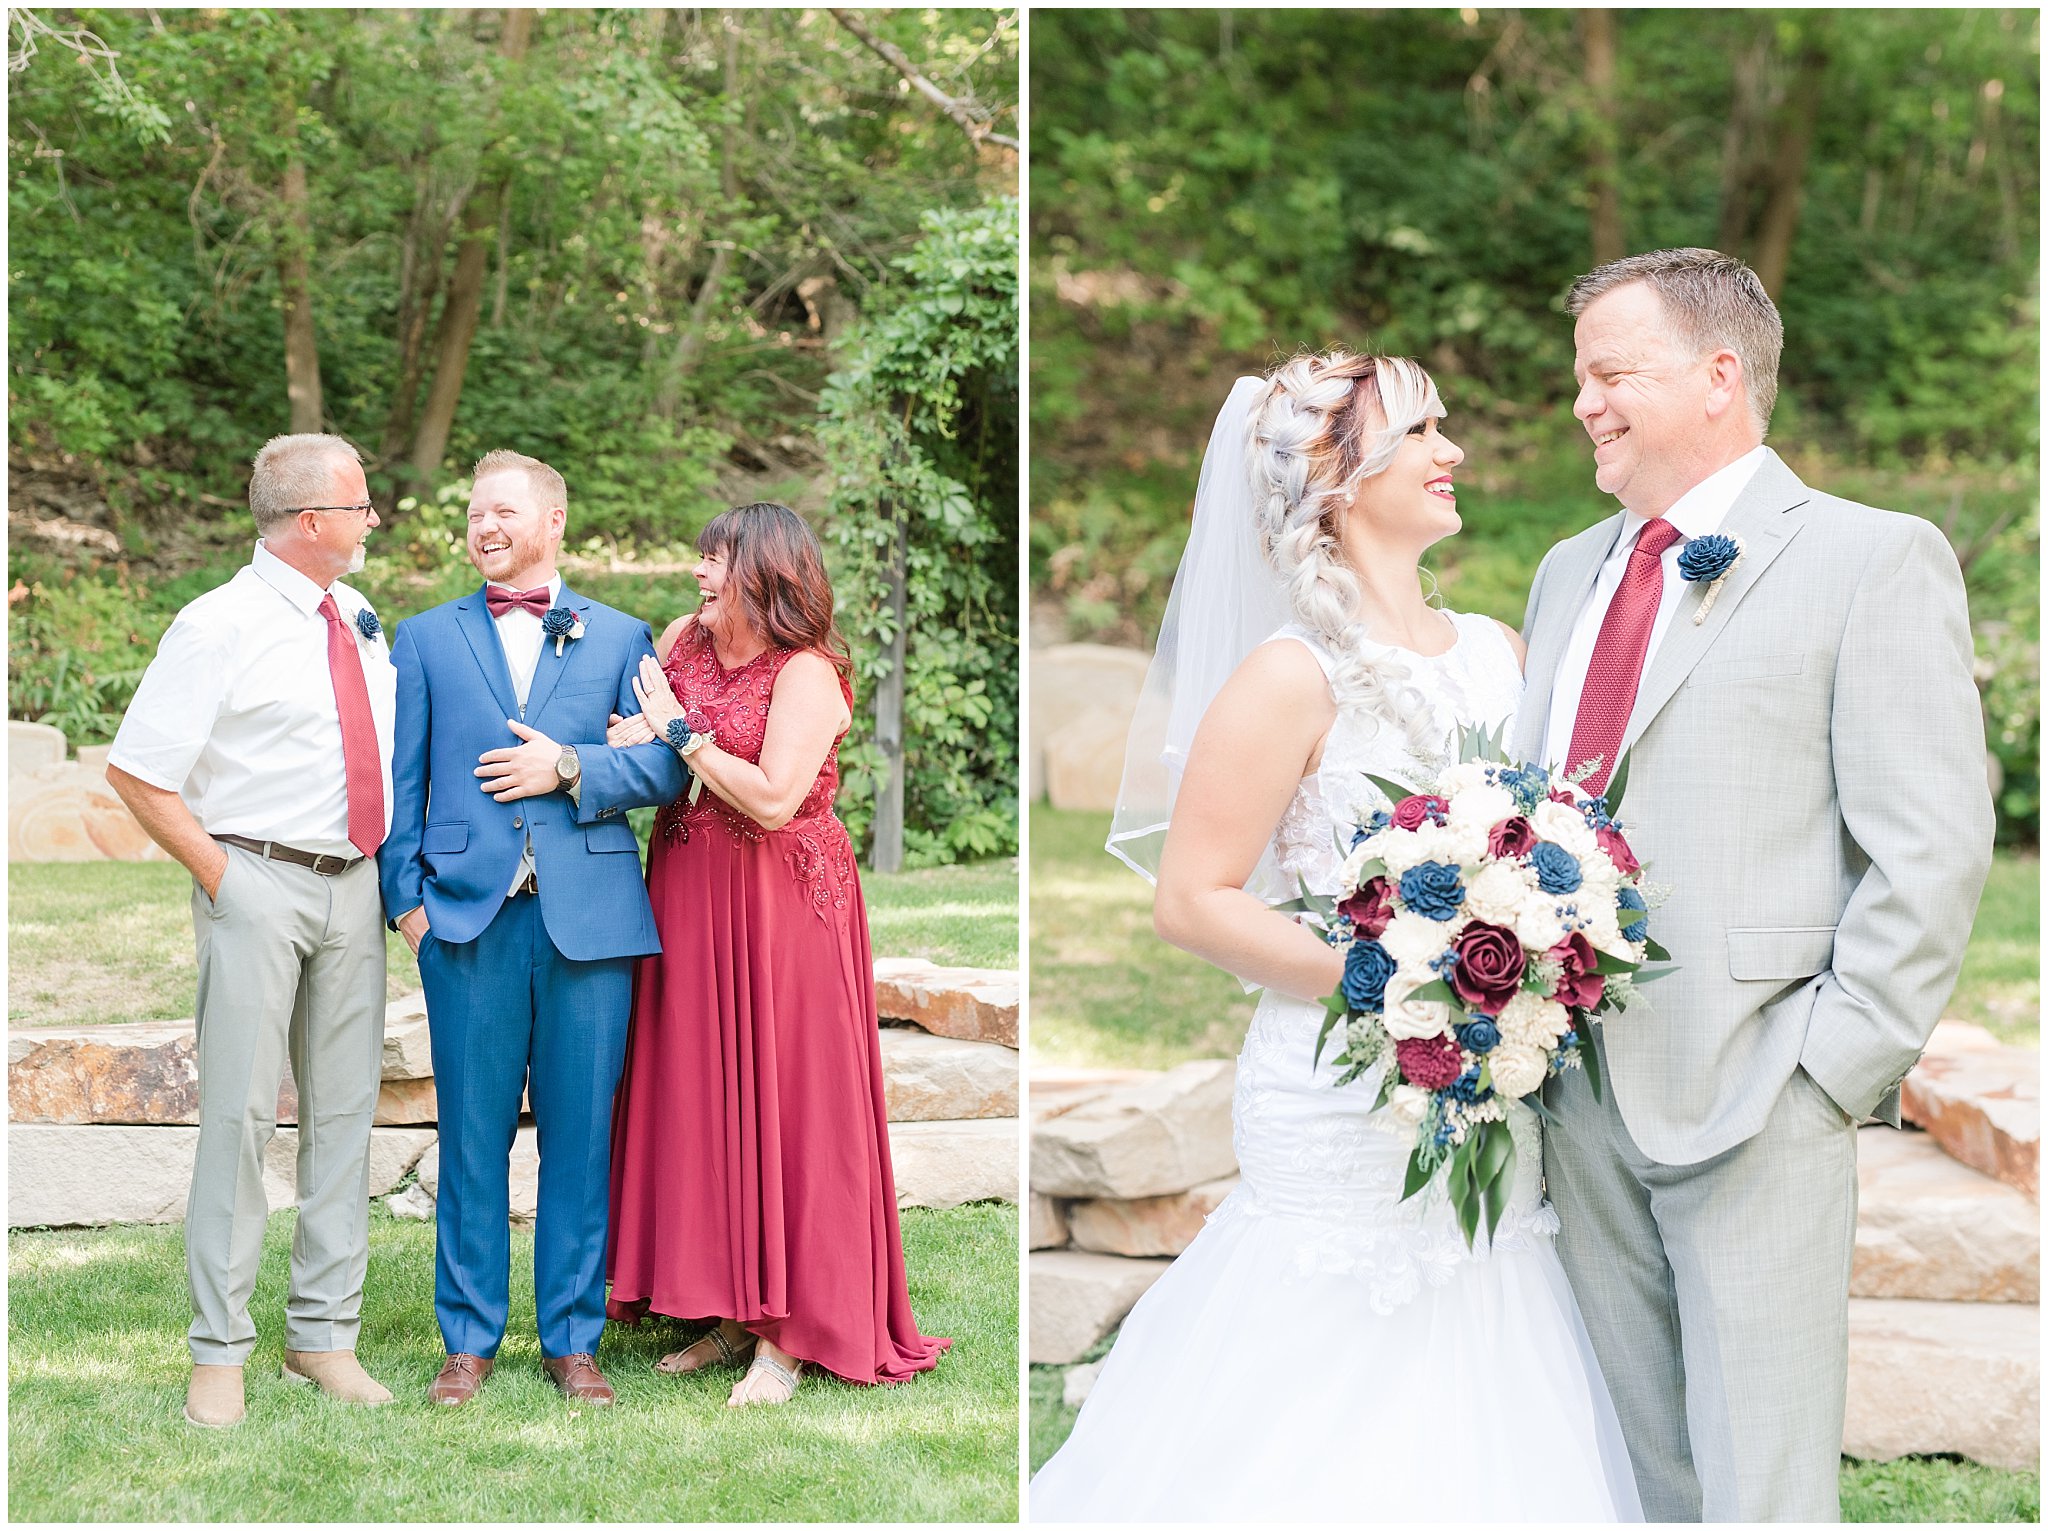 Family portraits before wedding | Log Haven Summer Mountain Wedding | Jessie and Dallin Photography